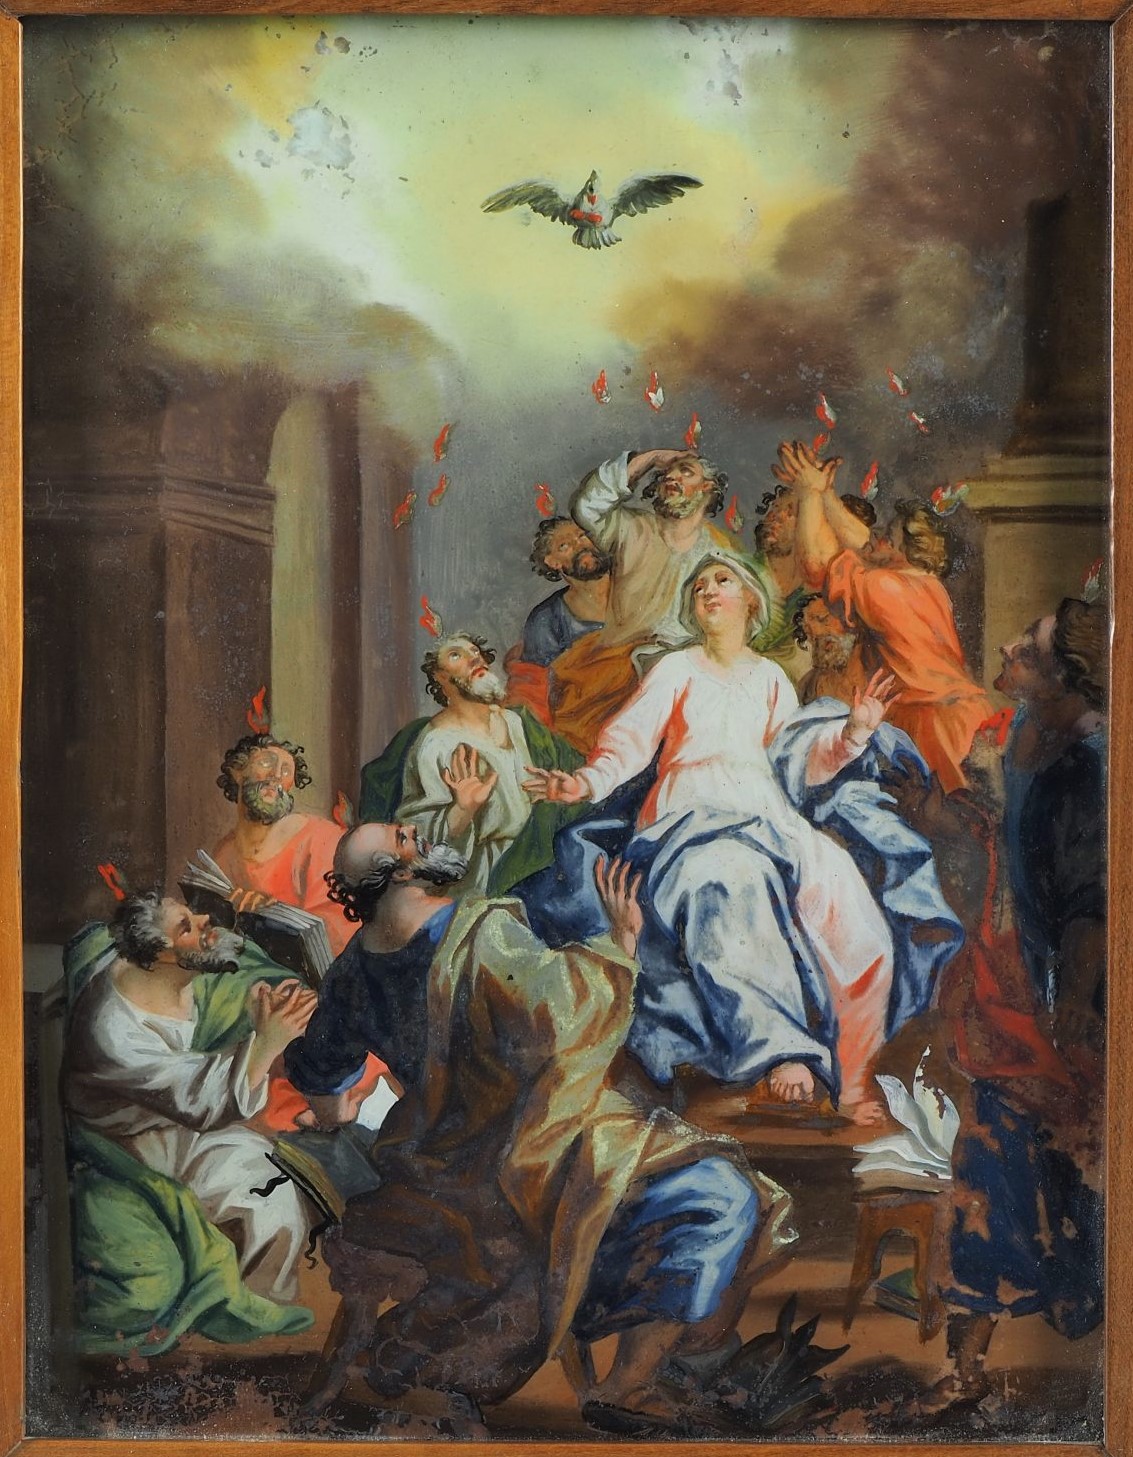 Reverse glass painting 19th c. - Pentecost / outpouring of the Holy Spirit.